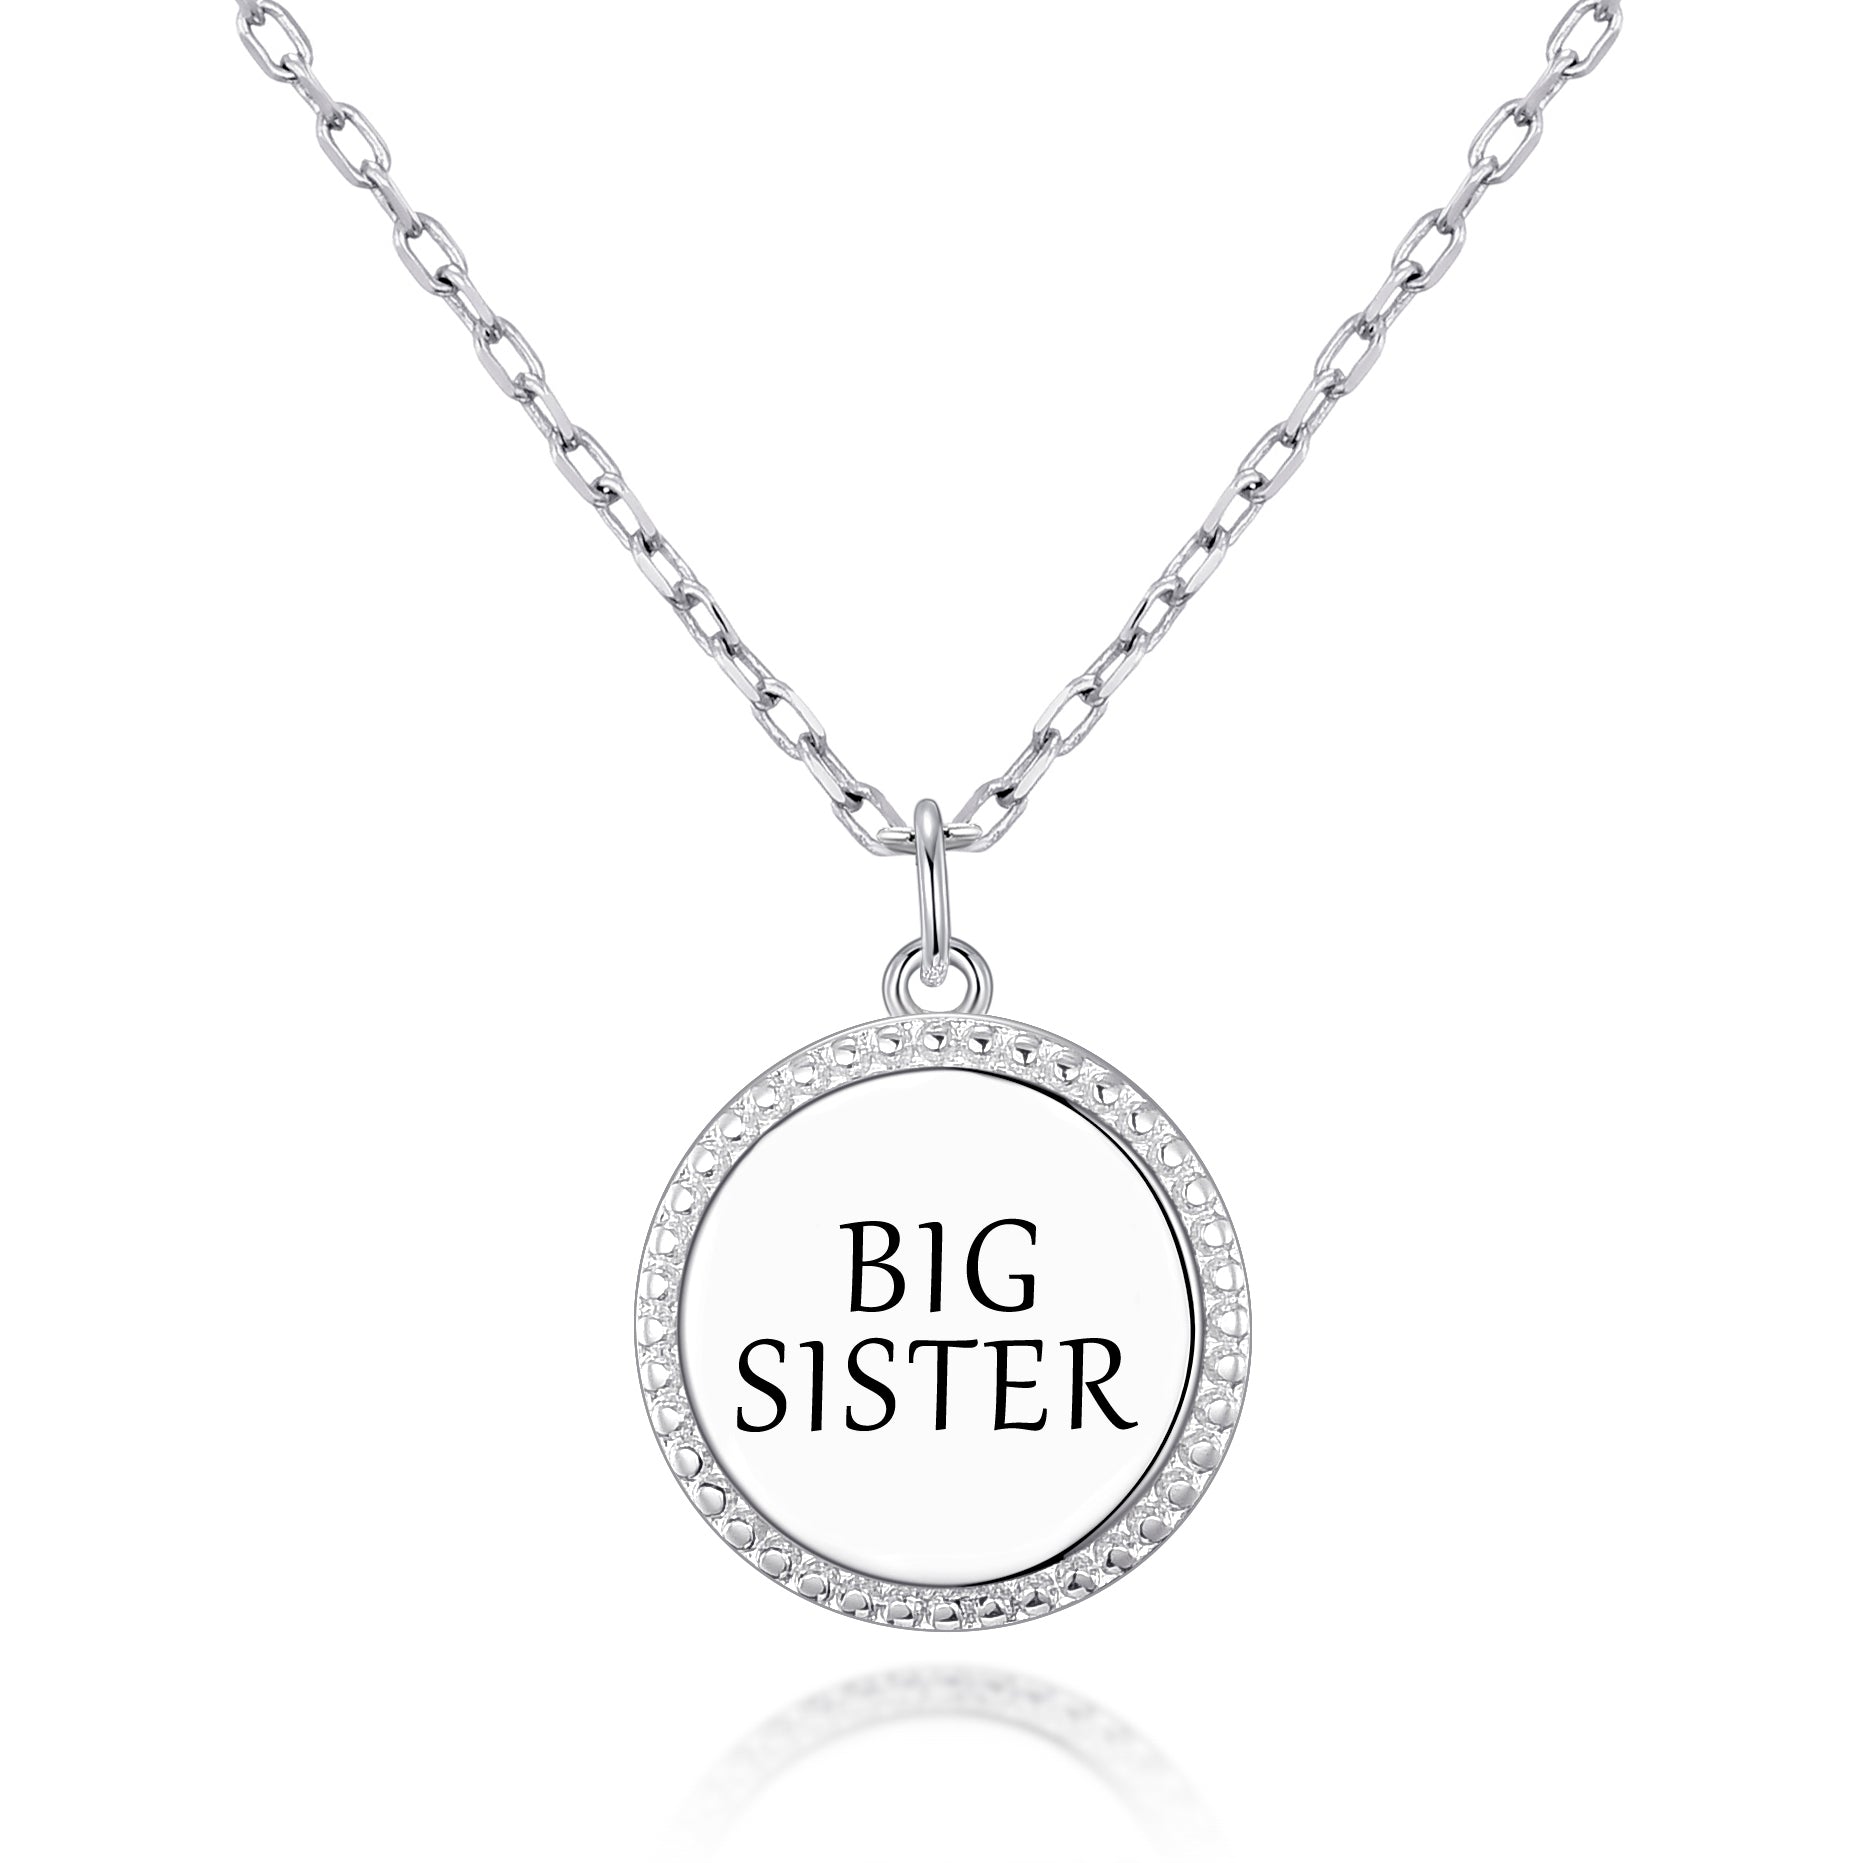 Silver Plated Filigree Disc Big Sister Necklace by Philip Jones Jewellery